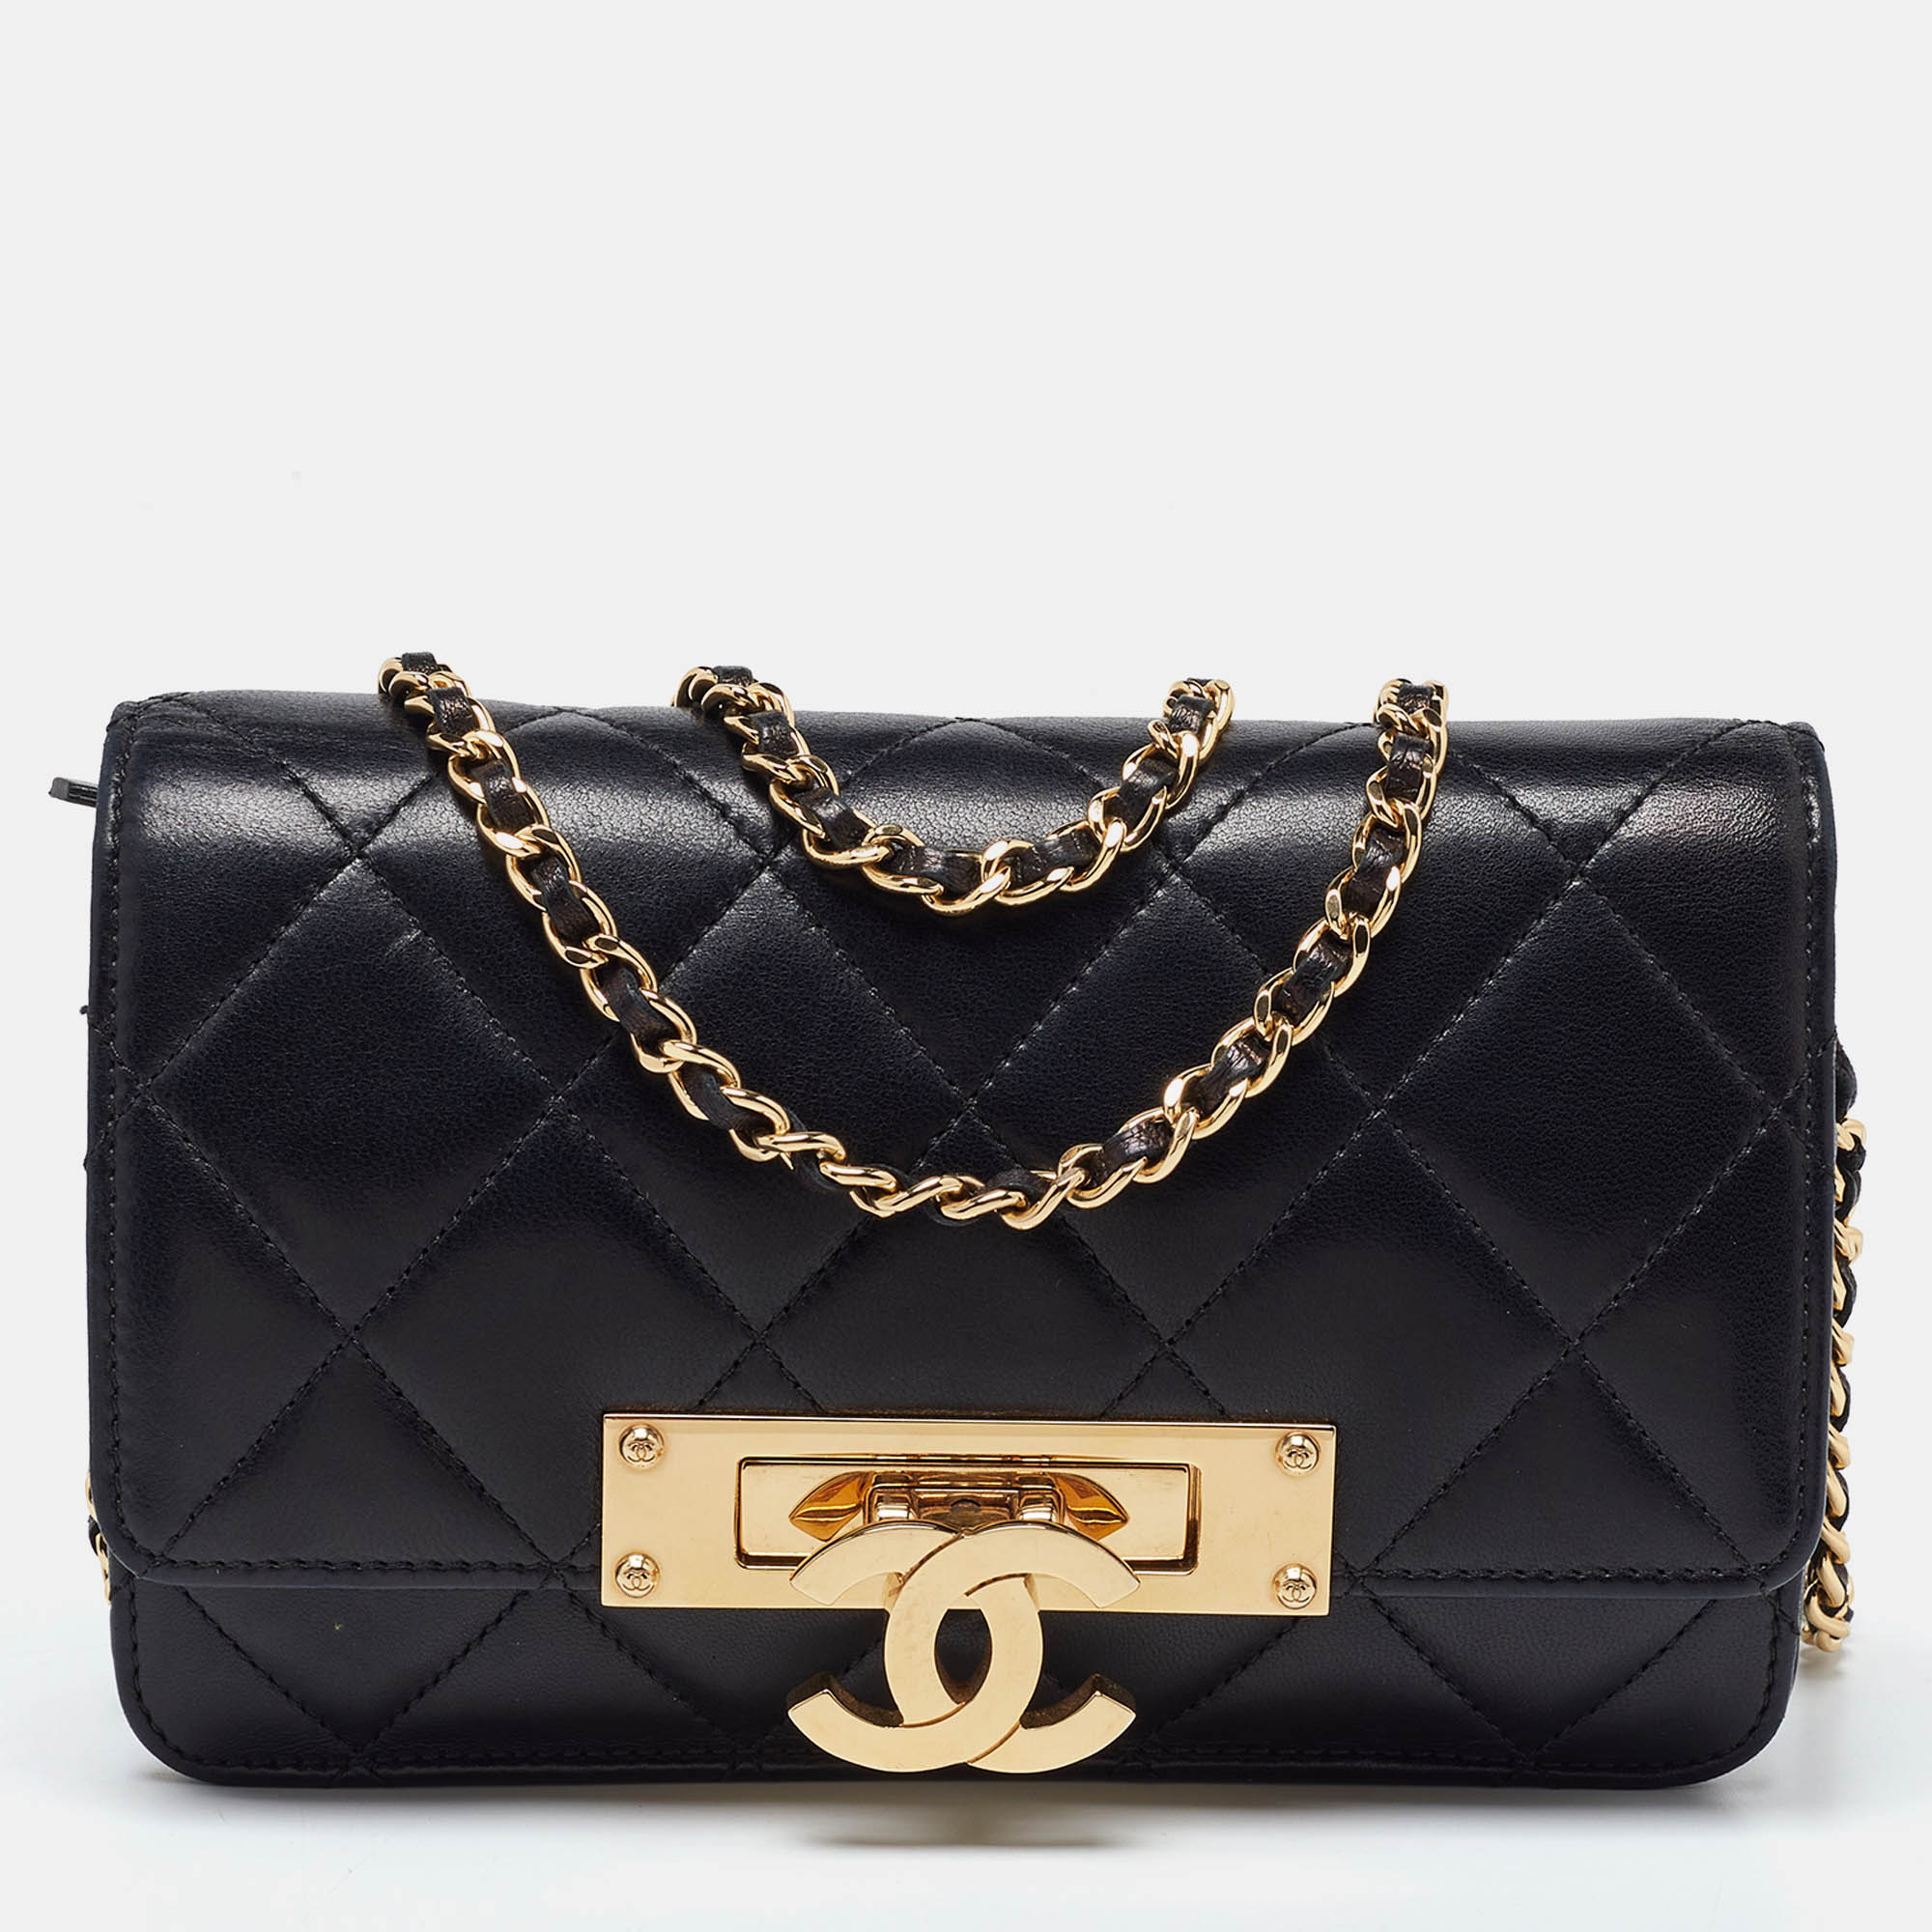 Chanel black quilted leather golden class wallet on chain